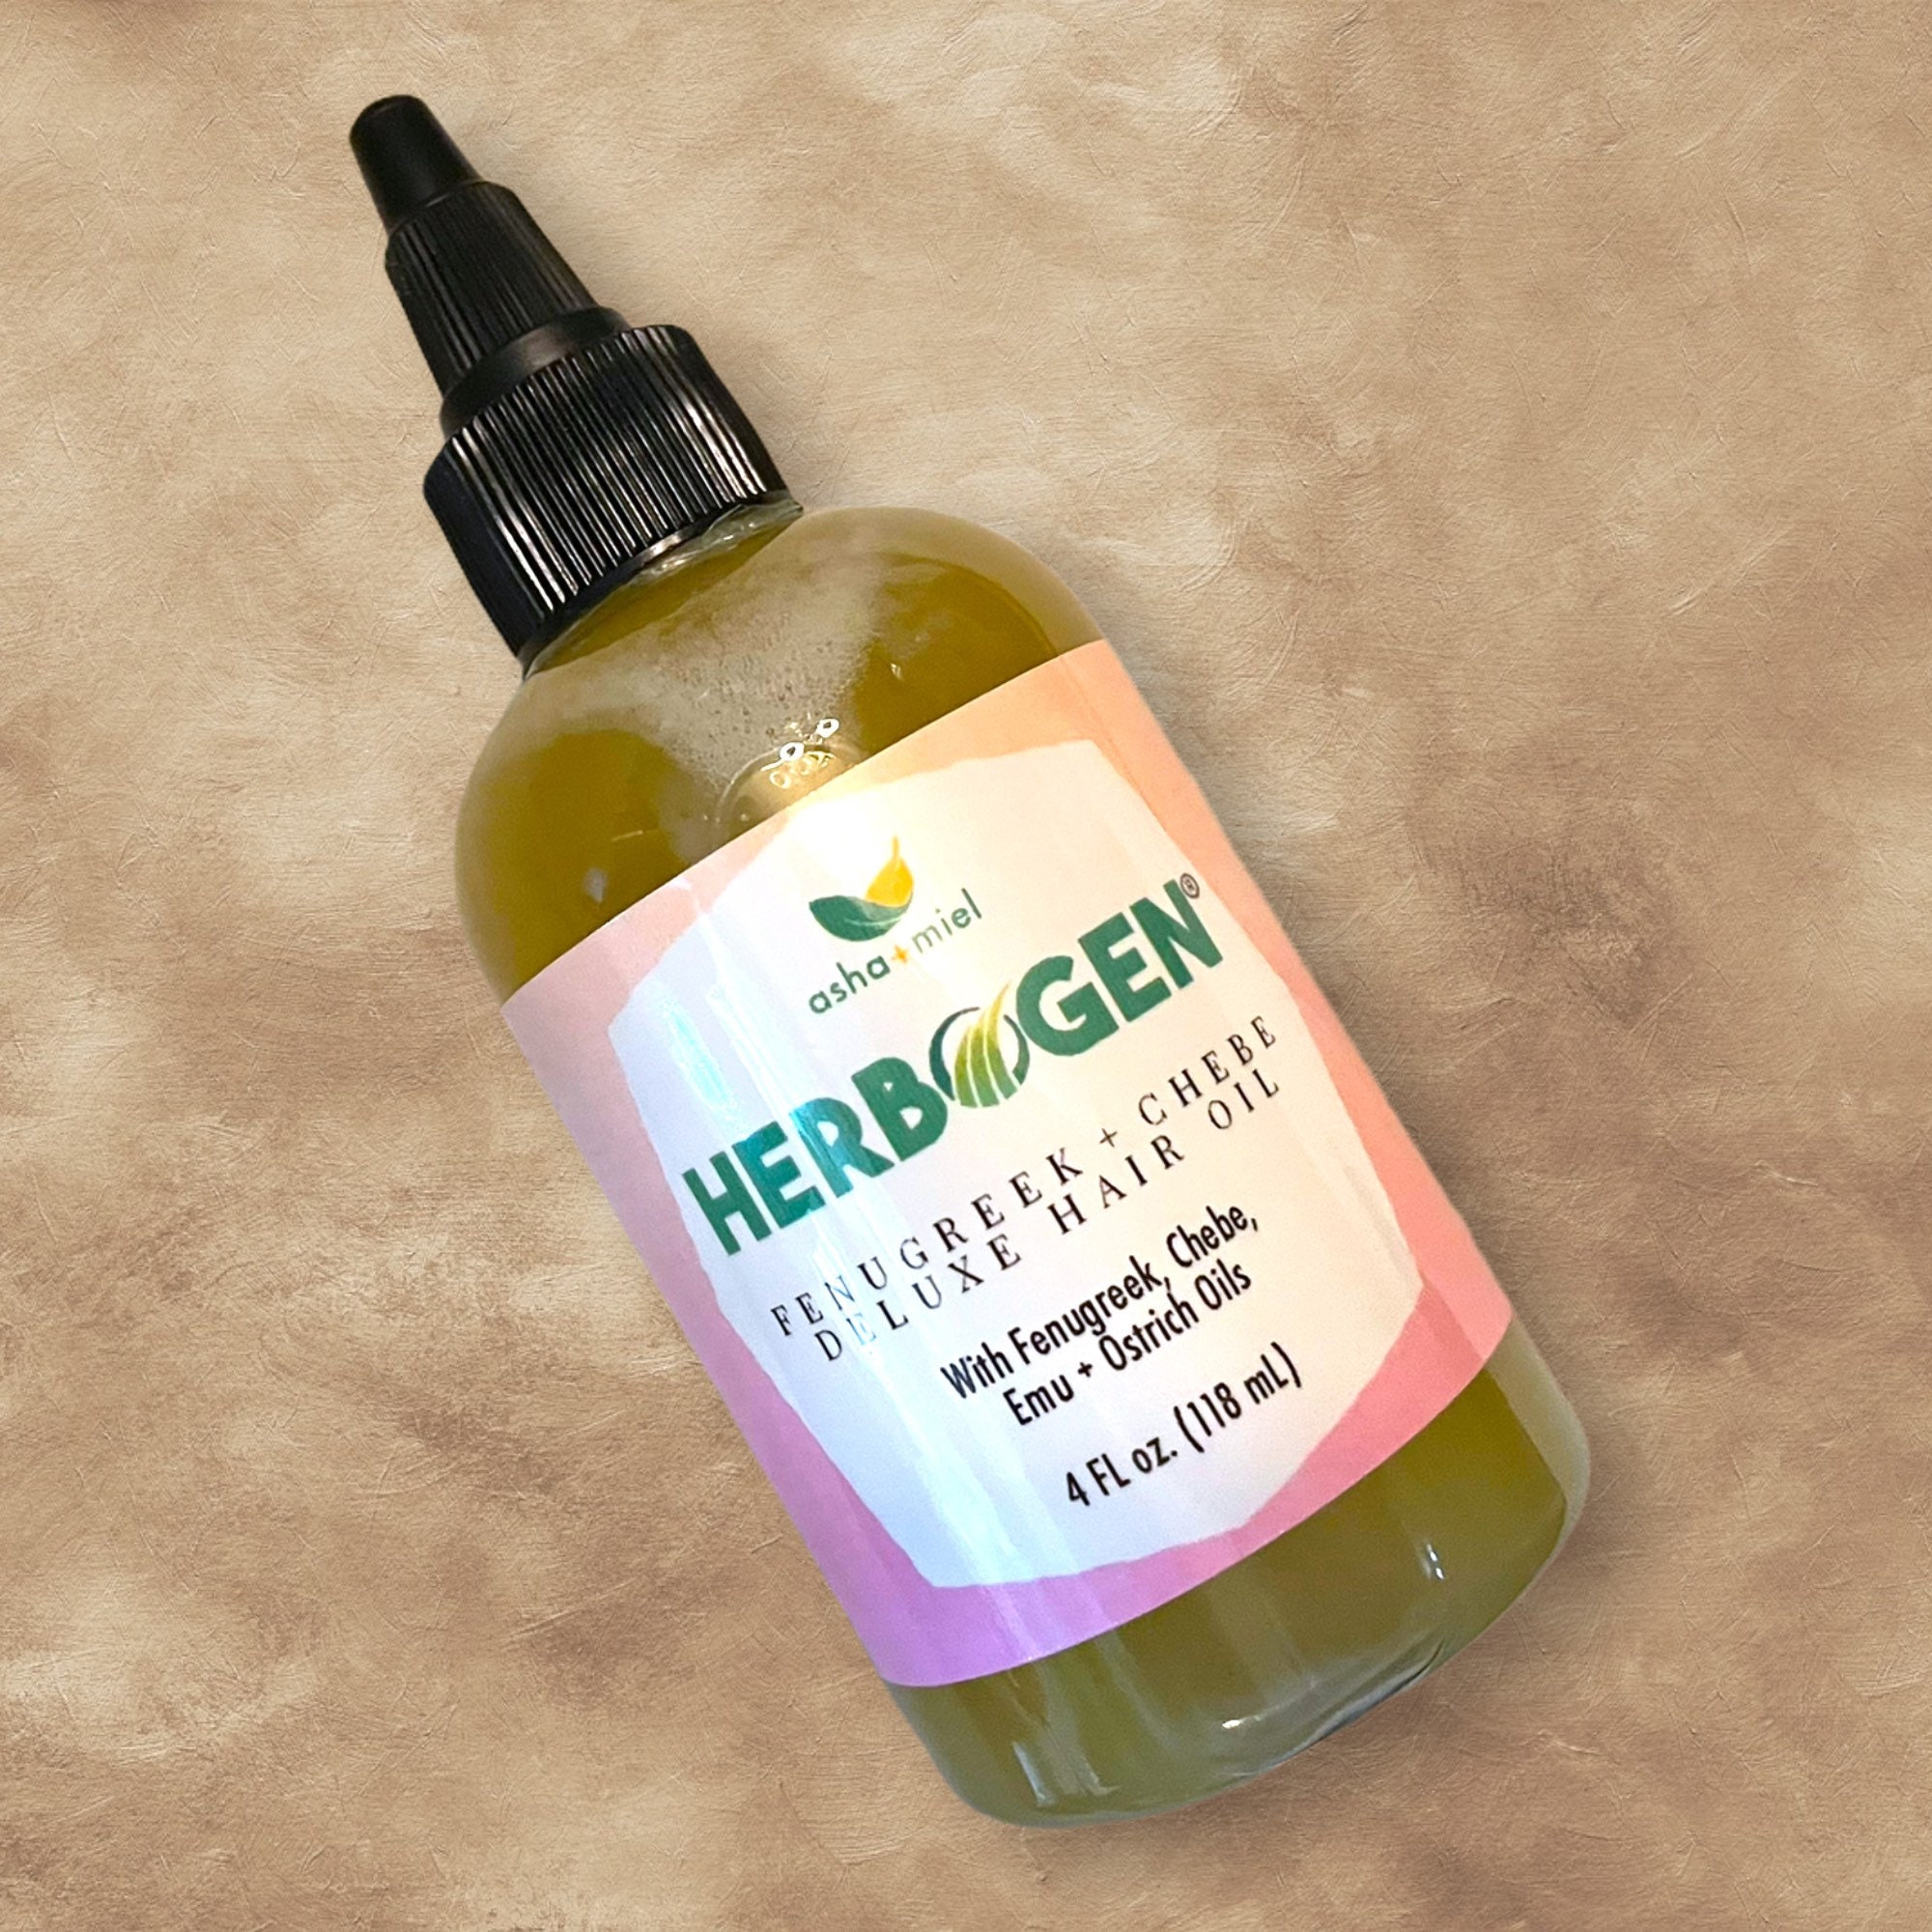 Potent Fenugreek and Chebe Deluxe Hair Oil, Chebe Oil, Hair Growth, Fenugreek